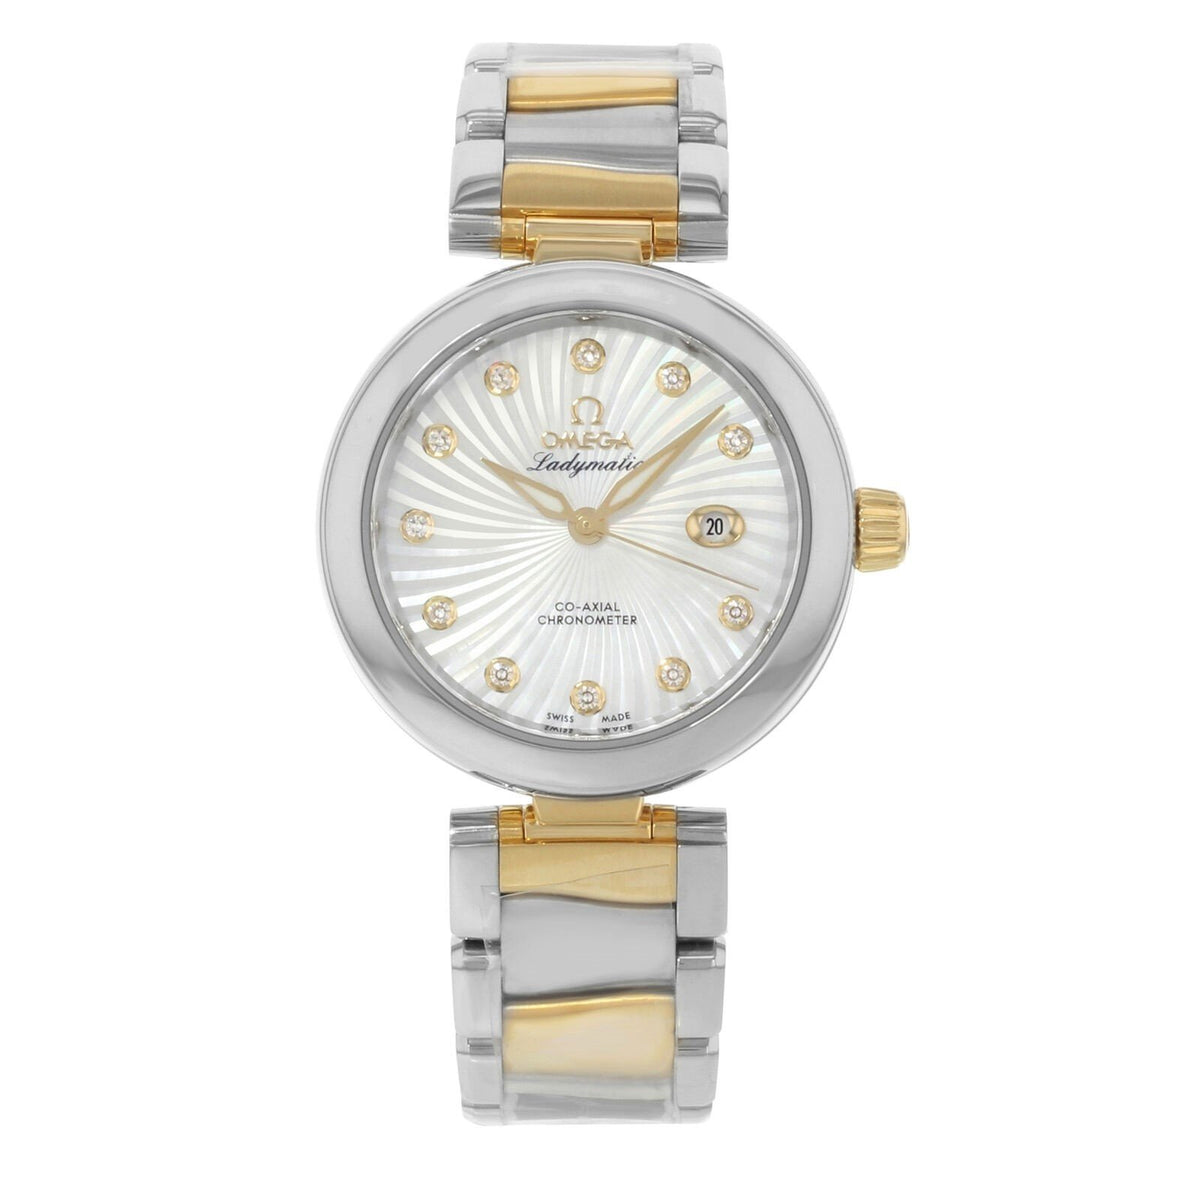 Omega Women&#39;s 425.20.34.20.55.002 De Ville Ladymatic Two-Tone 18kt Gold and Stainless Steel Watch